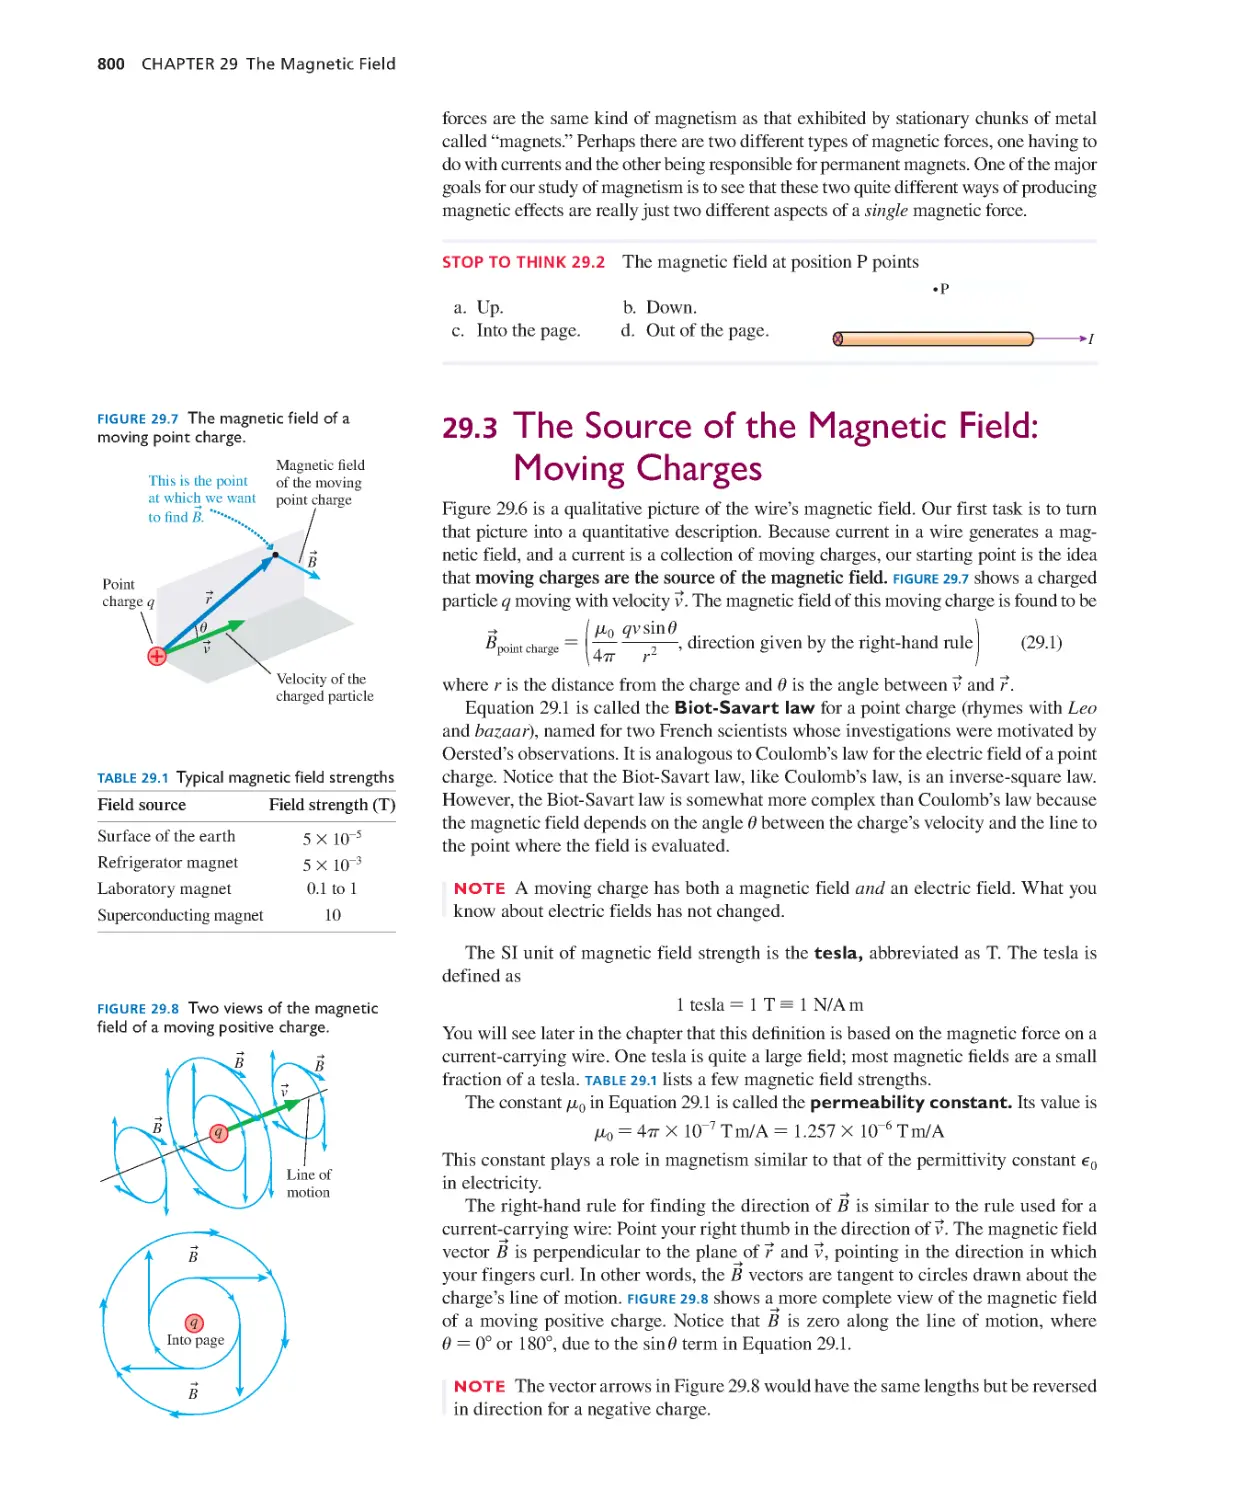 29.3. The Source of the Magnetic Field: Moving Charges